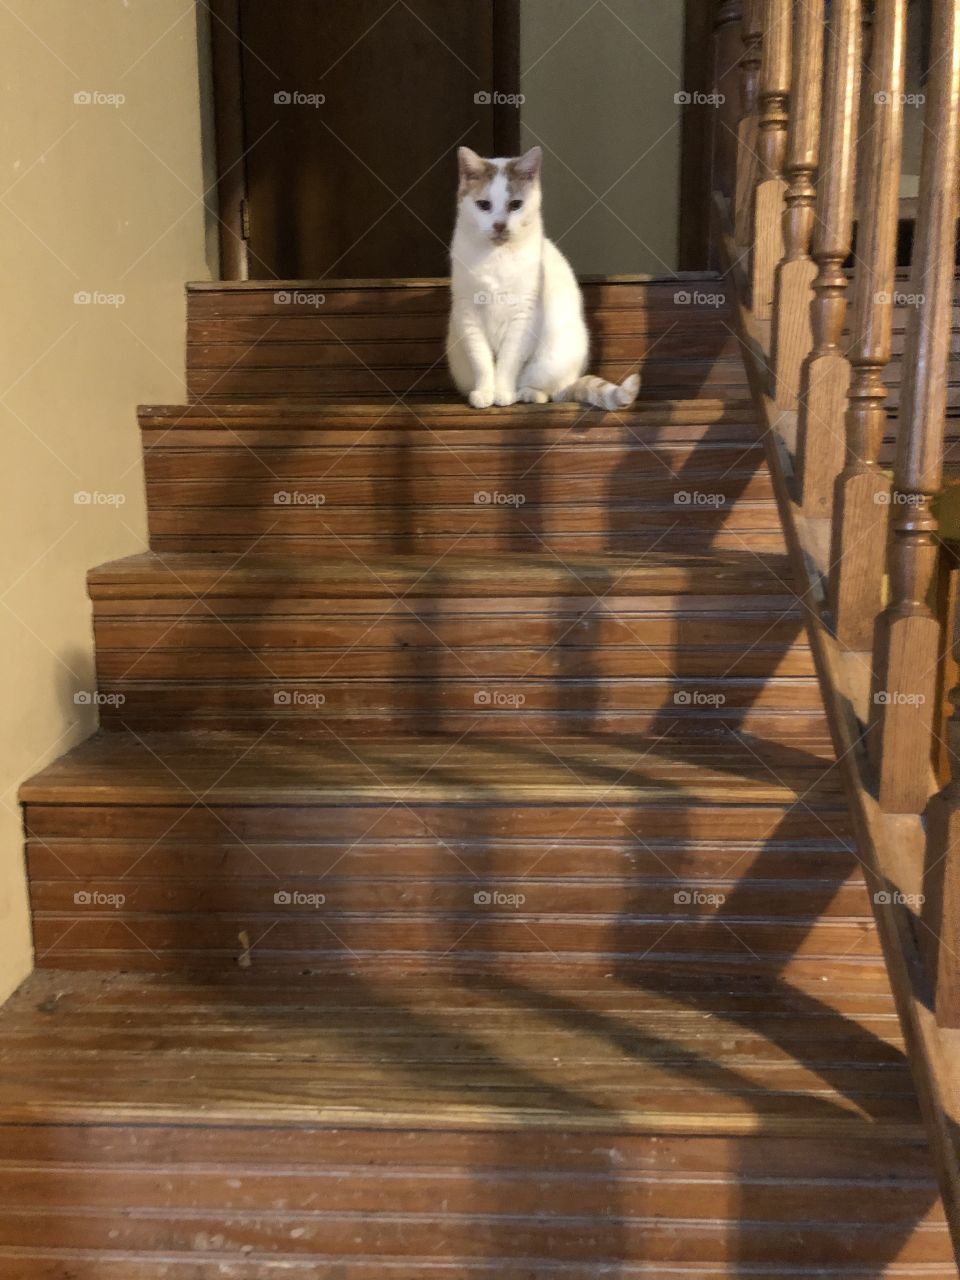 Staircase shadows and a cat